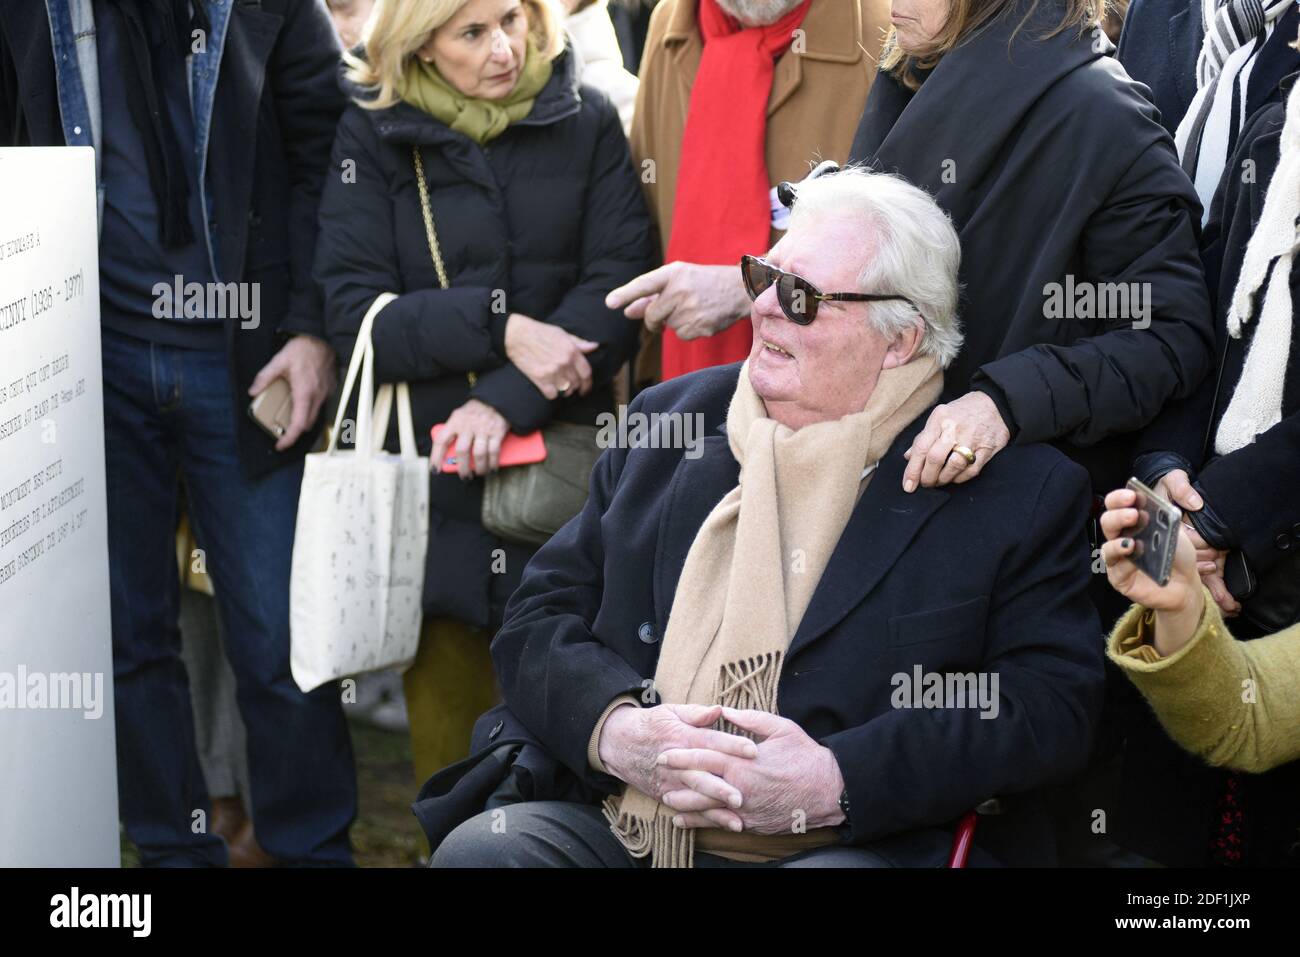 French cartoonist and illustrator Jean-Jacques Sempe at a ceremony for the unveiling of a commemorative statue of French cartoonist Rene Goscinny by French sculptor Sebastien Langloys in Paris, France on January 23, 2020. Photo by Patrice Pierrot/Avenir Pictures/ABACAPRESS.COM Stock Photo